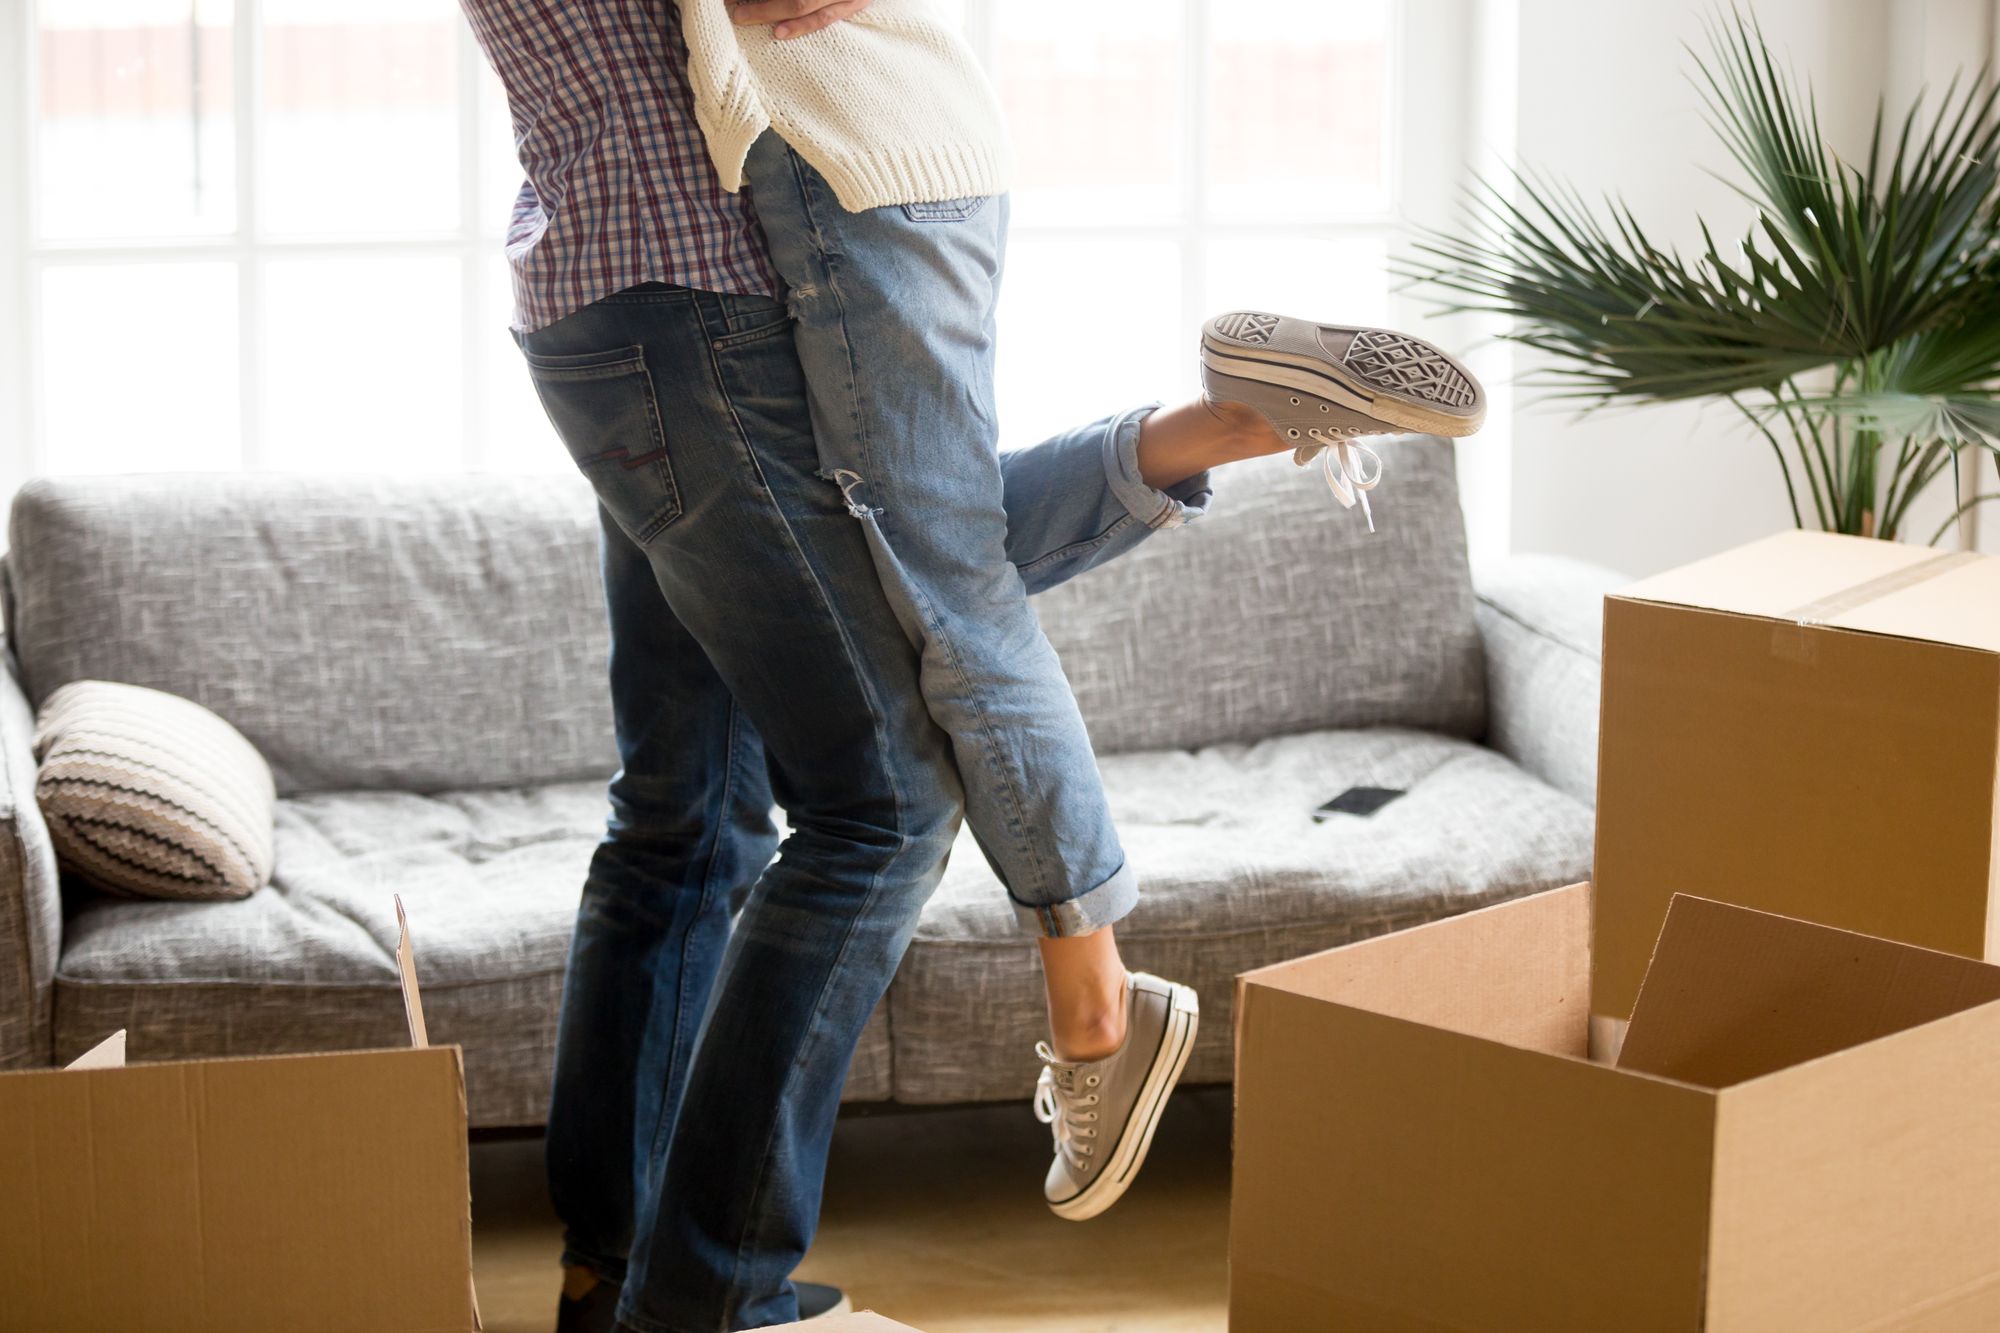 Couple Moving In Together By fizkes | www.shutterstock.com